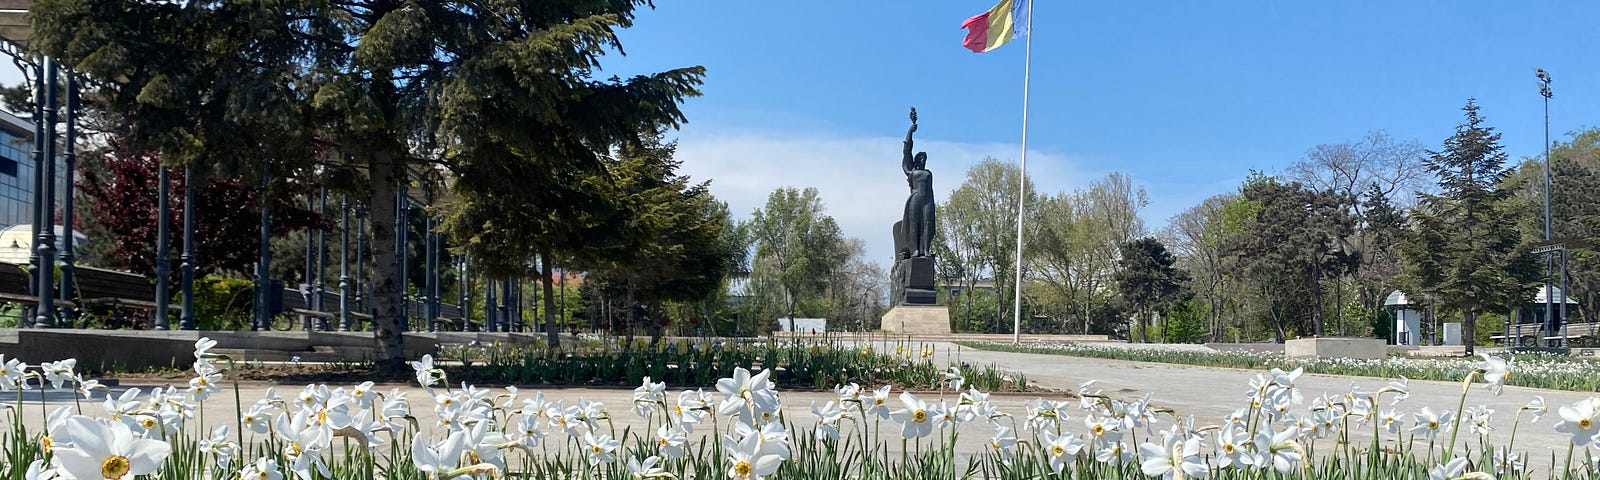 Park with flowers, statue and Romanian flag.